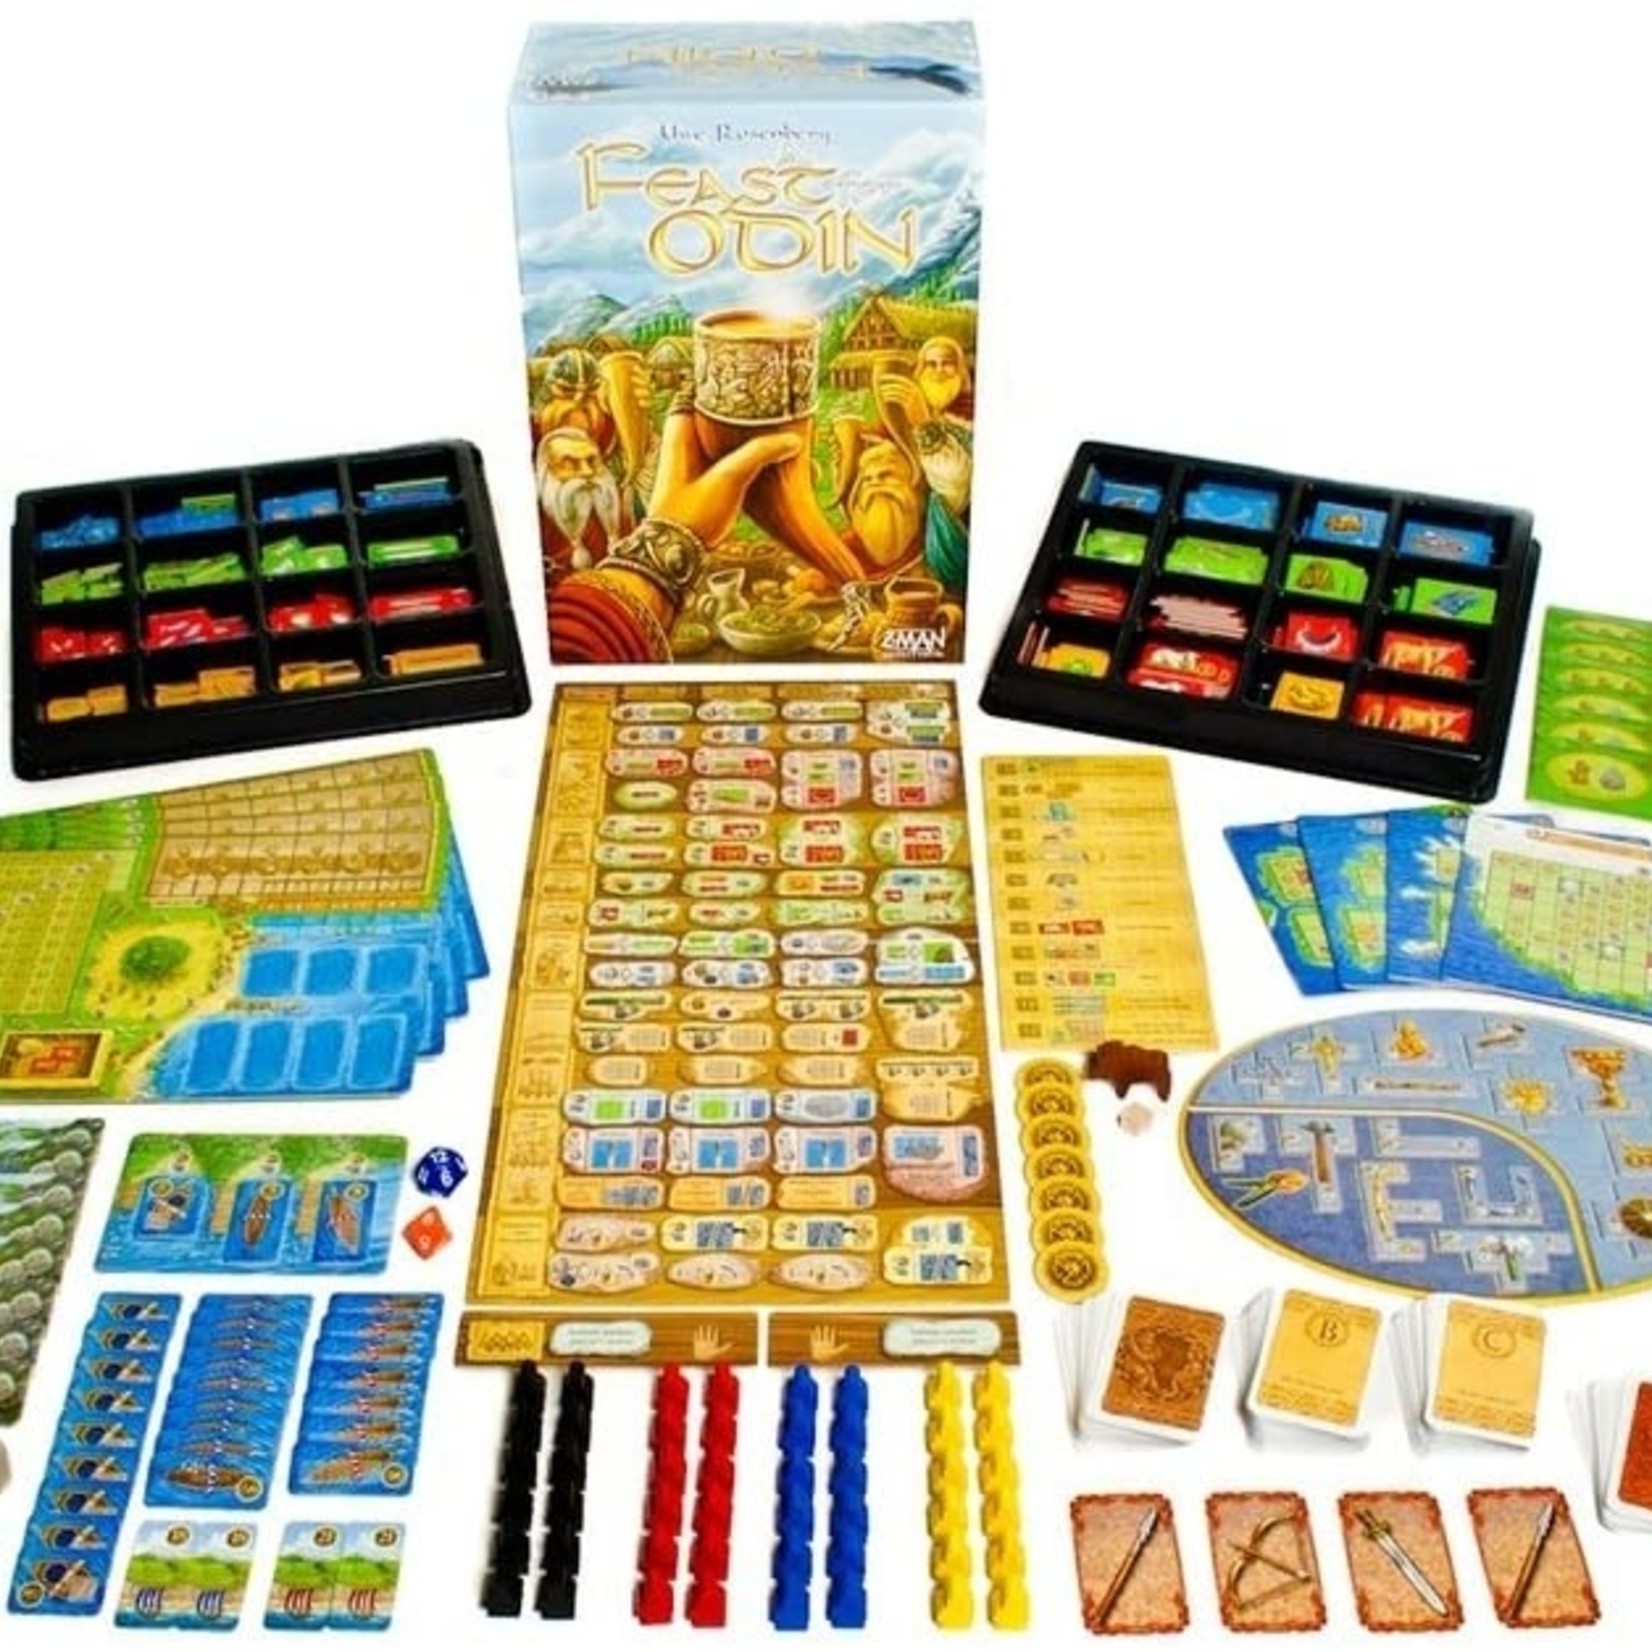 Feuerland Feast for Odin